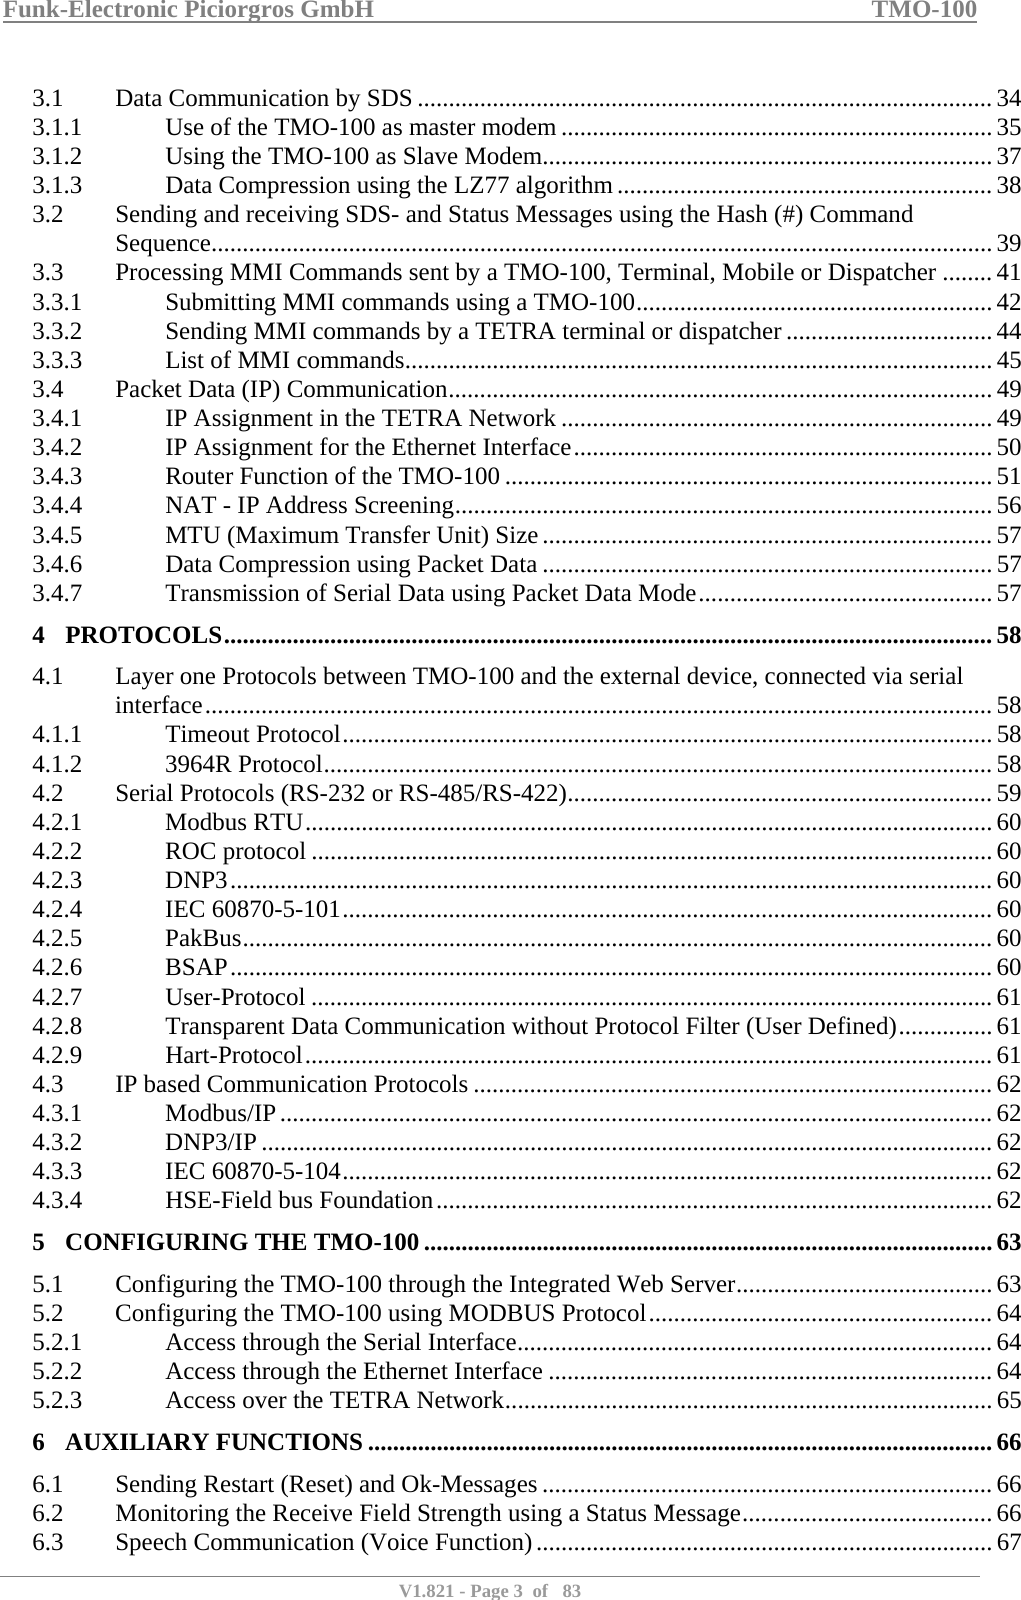 Funk-Electronic Piciorgros GmbH   TMO-100   V1.821 - Page 3  of   83   3.1  Data Communication by SDS ............................................................................................ 34 3.1.1  Use of the TMO-100 as master modem ..................................................................... 35 3.1.2  Using the TMO-100 as Slave Modem........................................................................ 37 3.1.3  Data Compression using the LZ77 algorithm............................................................ 38 3.2  Sending and receiving SDS- and Status Messages using the Hash (#) Command Sequence............................................................................................................................. 39 3.3  Processing MMI Commands sent by a TMO-100, Terminal, Mobile or Dispatcher ........ 41 3.3.1  Submitting MMI commands using a TMO-100......................................................... 42 3.3.2  Sending MMI commands by a TETRA terminal or dispatcher ................................. 44 3.3.3  List of MMI commands.............................................................................................. 45 3.4  Packet Data (IP) Communication....................................................................................... 49 3.4.1  IP Assignment in the TETRA Network ..................................................................... 49 3.4.2  IP Assignment for the Ethernet Interface................................................................... 50 3.4.3  Router Function of the TMO-100 .............................................................................. 51 3.4.4  NAT - IP Address Screening...................................................................................... 56 3.4.5  MTU (Maximum Transfer Unit) Size........................................................................57 3.4.6  Data Compression using Packet Data ........................................................................ 57 3.4.7  Transmission of Serial Data using Packet Data Mode............................................... 57 4 PROTOCOLS........................................................................................................................... 58 4.1  Layer one Protocols between TMO-100 and the external device, connected via serial interface..............................................................................................................................58 4.1.1 Timeout Protocol........................................................................................................ 58 4.1.2 3964R Protocol........................................................................................................... 58 4.2  Serial Protocols (RS-232 or RS-485/RS-422)....................................................................59 4.2.1 Modbus RTU.............................................................................................................. 60 4.2.2 ROC protocol ............................................................................................................. 60 4.2.3 DNP3..........................................................................................................................60 4.2.4 IEC 60870-5-101........................................................................................................ 60 4.2.5 PakBus........................................................................................................................ 60 4.2.6 BSAP.......................................................................................................................... 60 4.2.7 User-Protocol .............................................................................................................61 4.2.8  Transparent Data Communication without Protocol Filter (User Defined)...............61 4.2.9 Hart-Protocol..............................................................................................................61 4.3  IP based Communication Protocols ................................................................................... 62 4.3.1 Modbus/IP.................................................................................................................. 62 4.3.2 DNP3/IP ..................................................................................................................... 62 4.3.3 IEC 60870-5-104........................................................................................................ 62 4.3.4  HSE-Field bus Foundation......................................................................................... 62 5 CONFIGURING THE TMO-100 ........................................................................................... 63 5.1  Configuring the TMO-100 through the Integrated Web Server......................................... 63 5.2  Configuring the TMO-100 using MODBUS Protocol.......................................................64 5.2.1  Access through the Serial Interface............................................................................ 64 5.2.2  Access through the Ethernet Interface ....................................................................... 64 5.2.3  Access over the TETRA Network.............................................................................. 65 6 AUXILIARY FUNCTIONS .................................................................................................... 66 6.1  Sending Restart (Reset) and Ok-Messages ........................................................................ 66 6.2  Monitoring the Receive Field Strength using a Status Message........................................ 66 6.3  Speech Communication (Voice Function).........................................................................67 